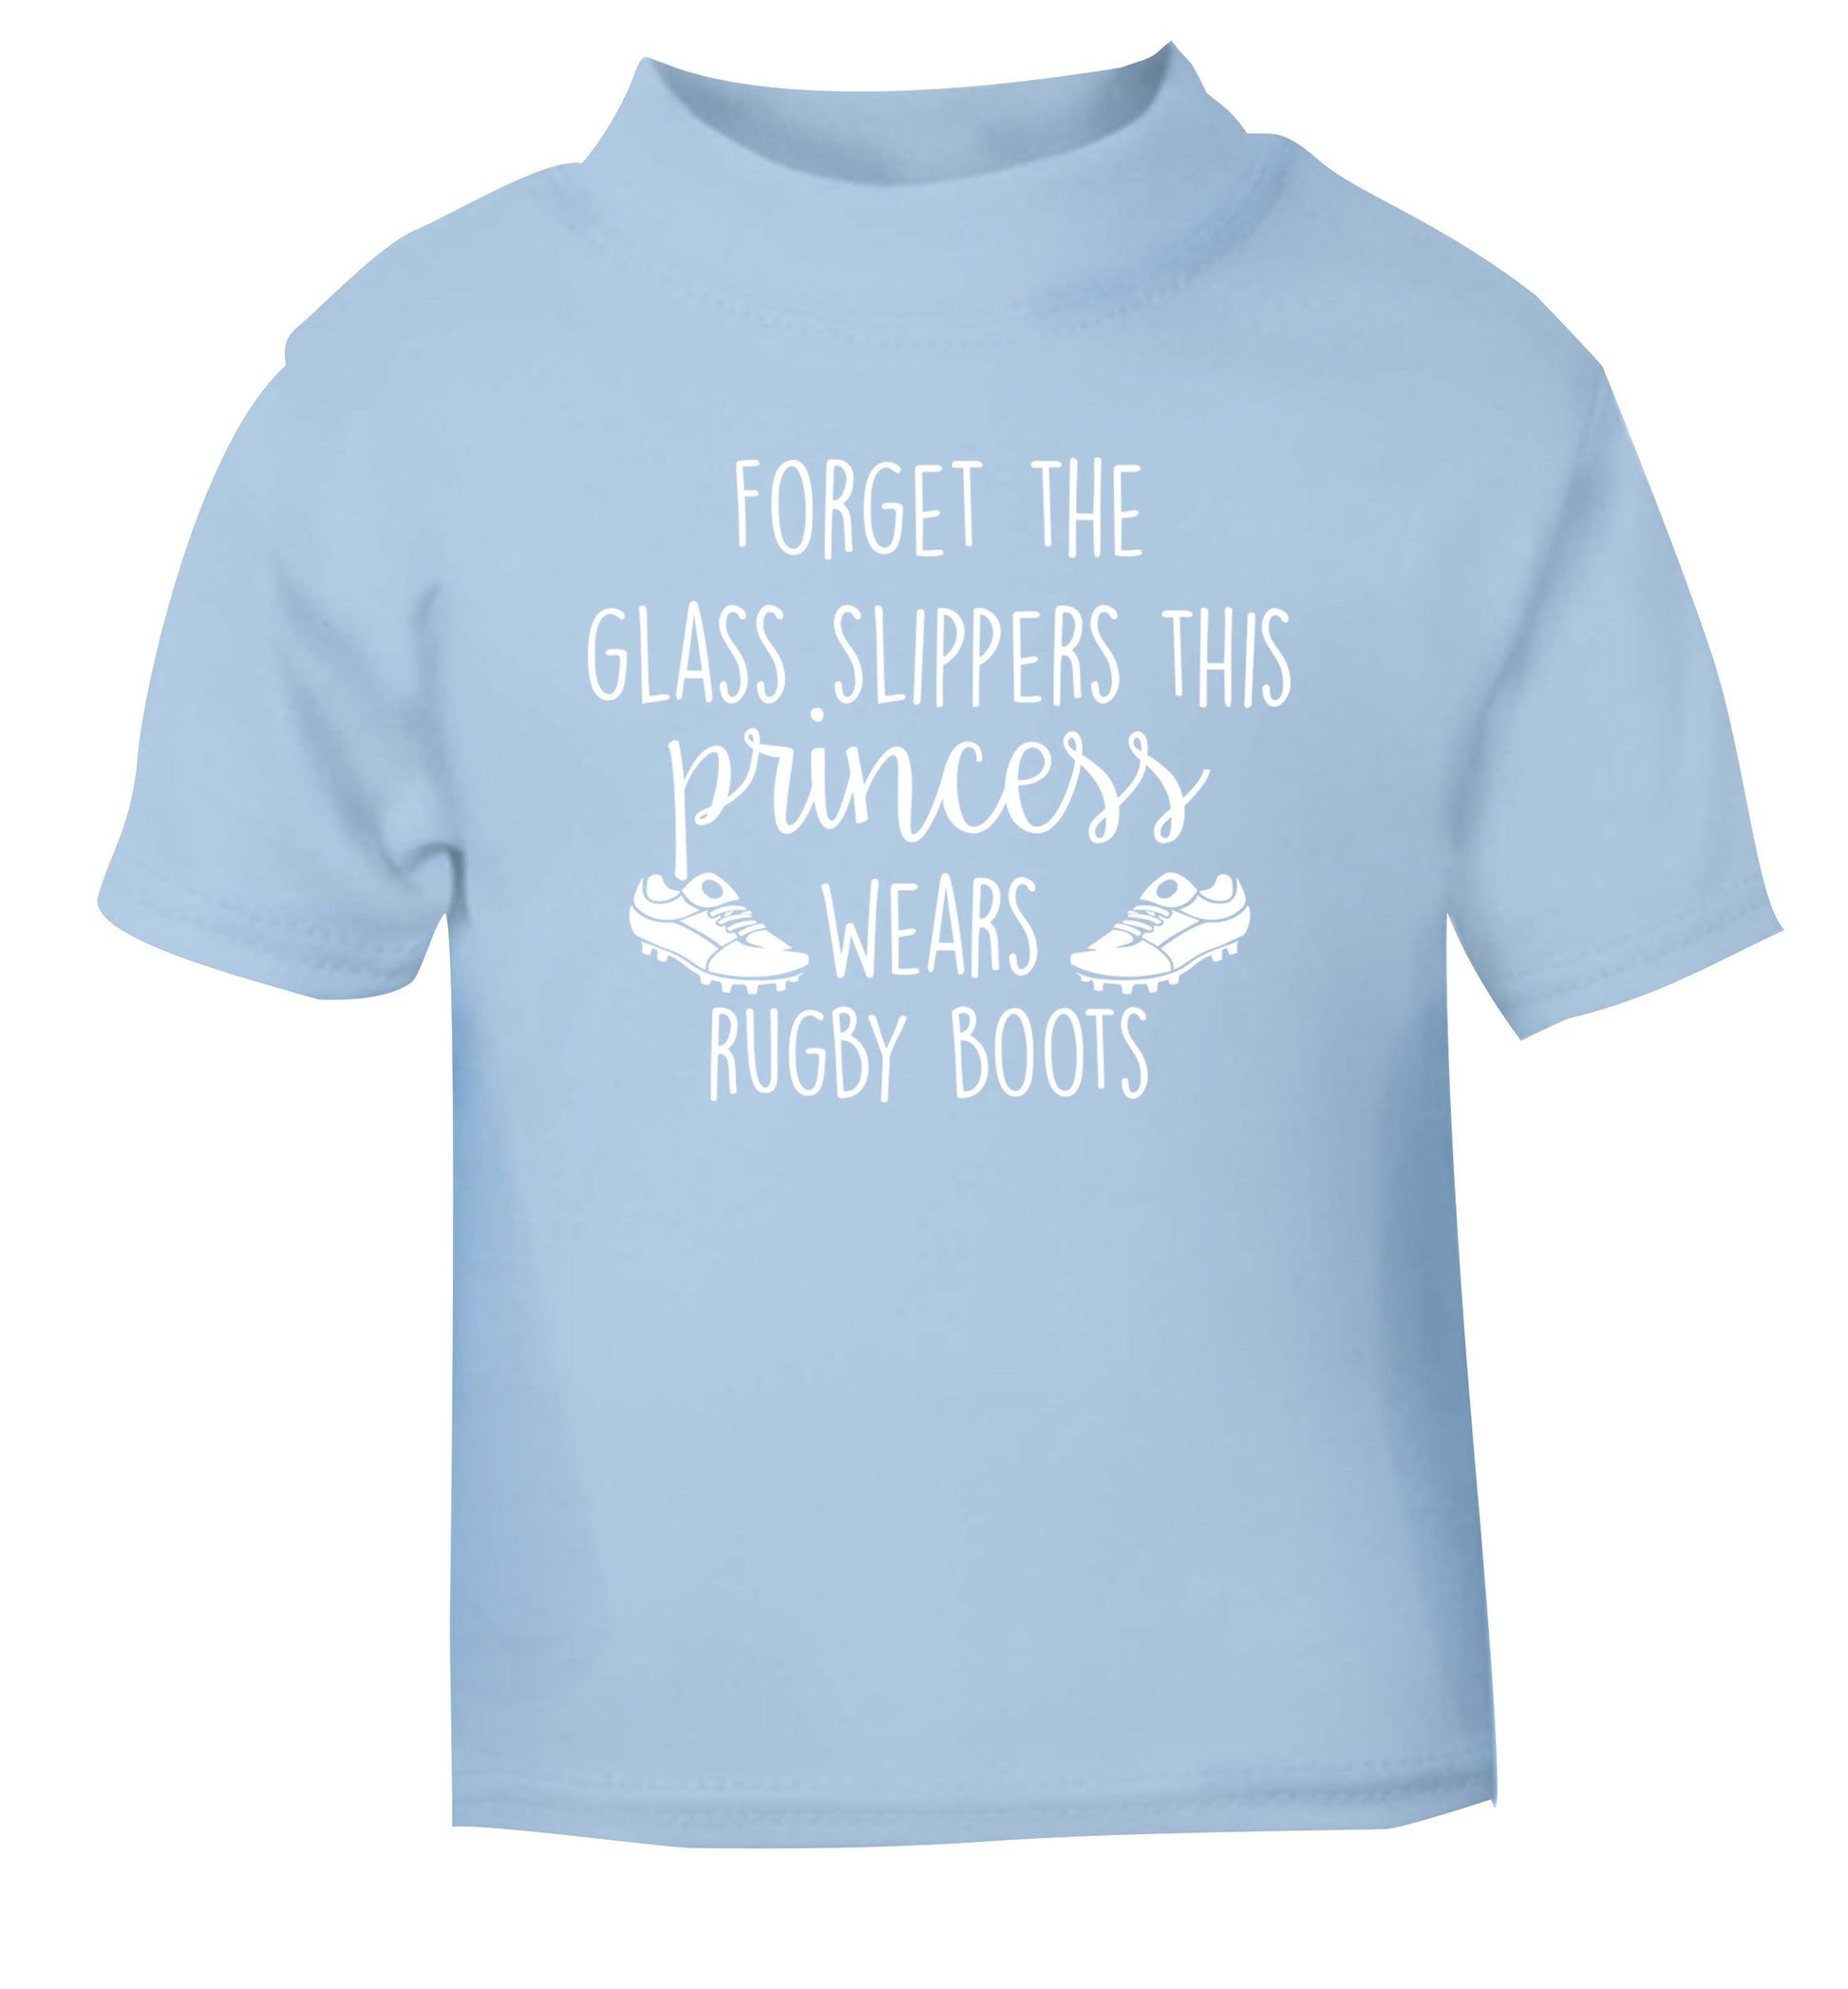 Forget the glass slippers this princess wears rugby boots light blue Baby Toddler Tshirt 2 Years